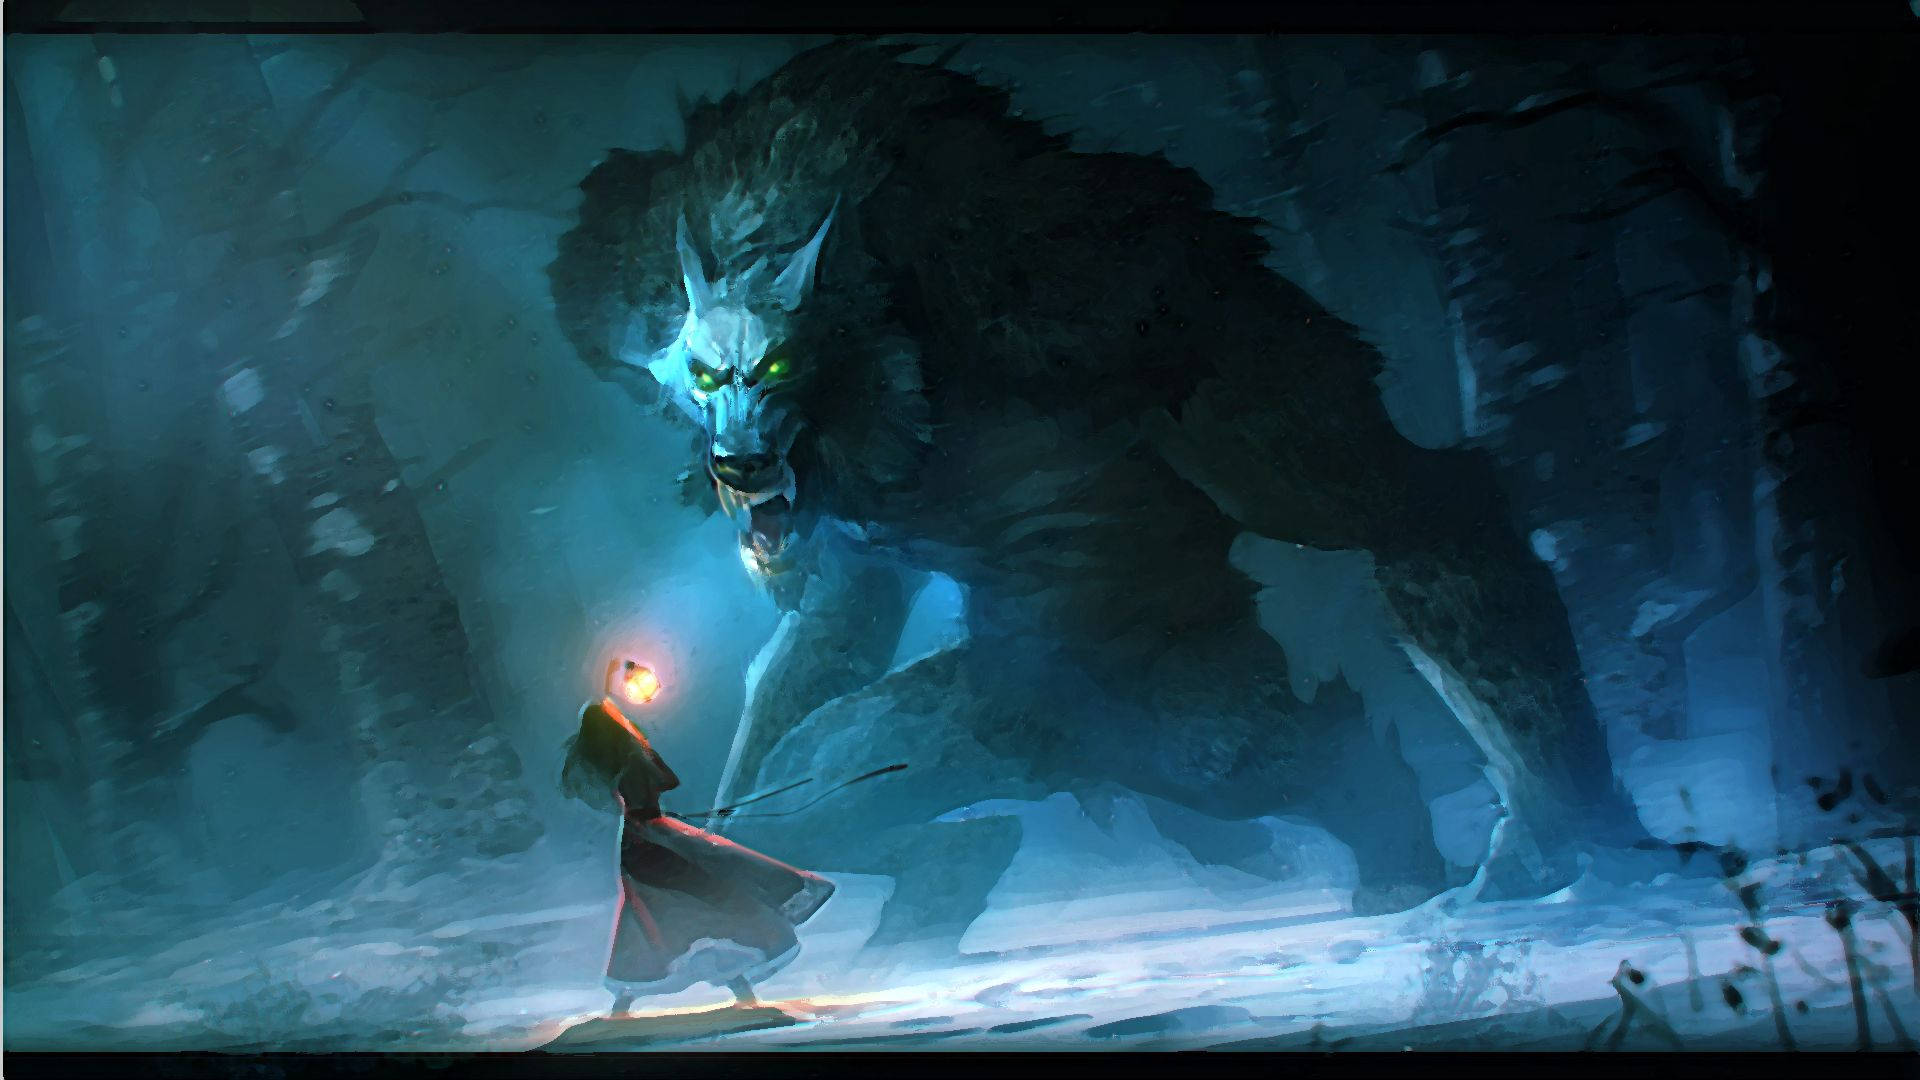 A Werewolf Embracing A Woman In Mystifying Darkness Wallpaper